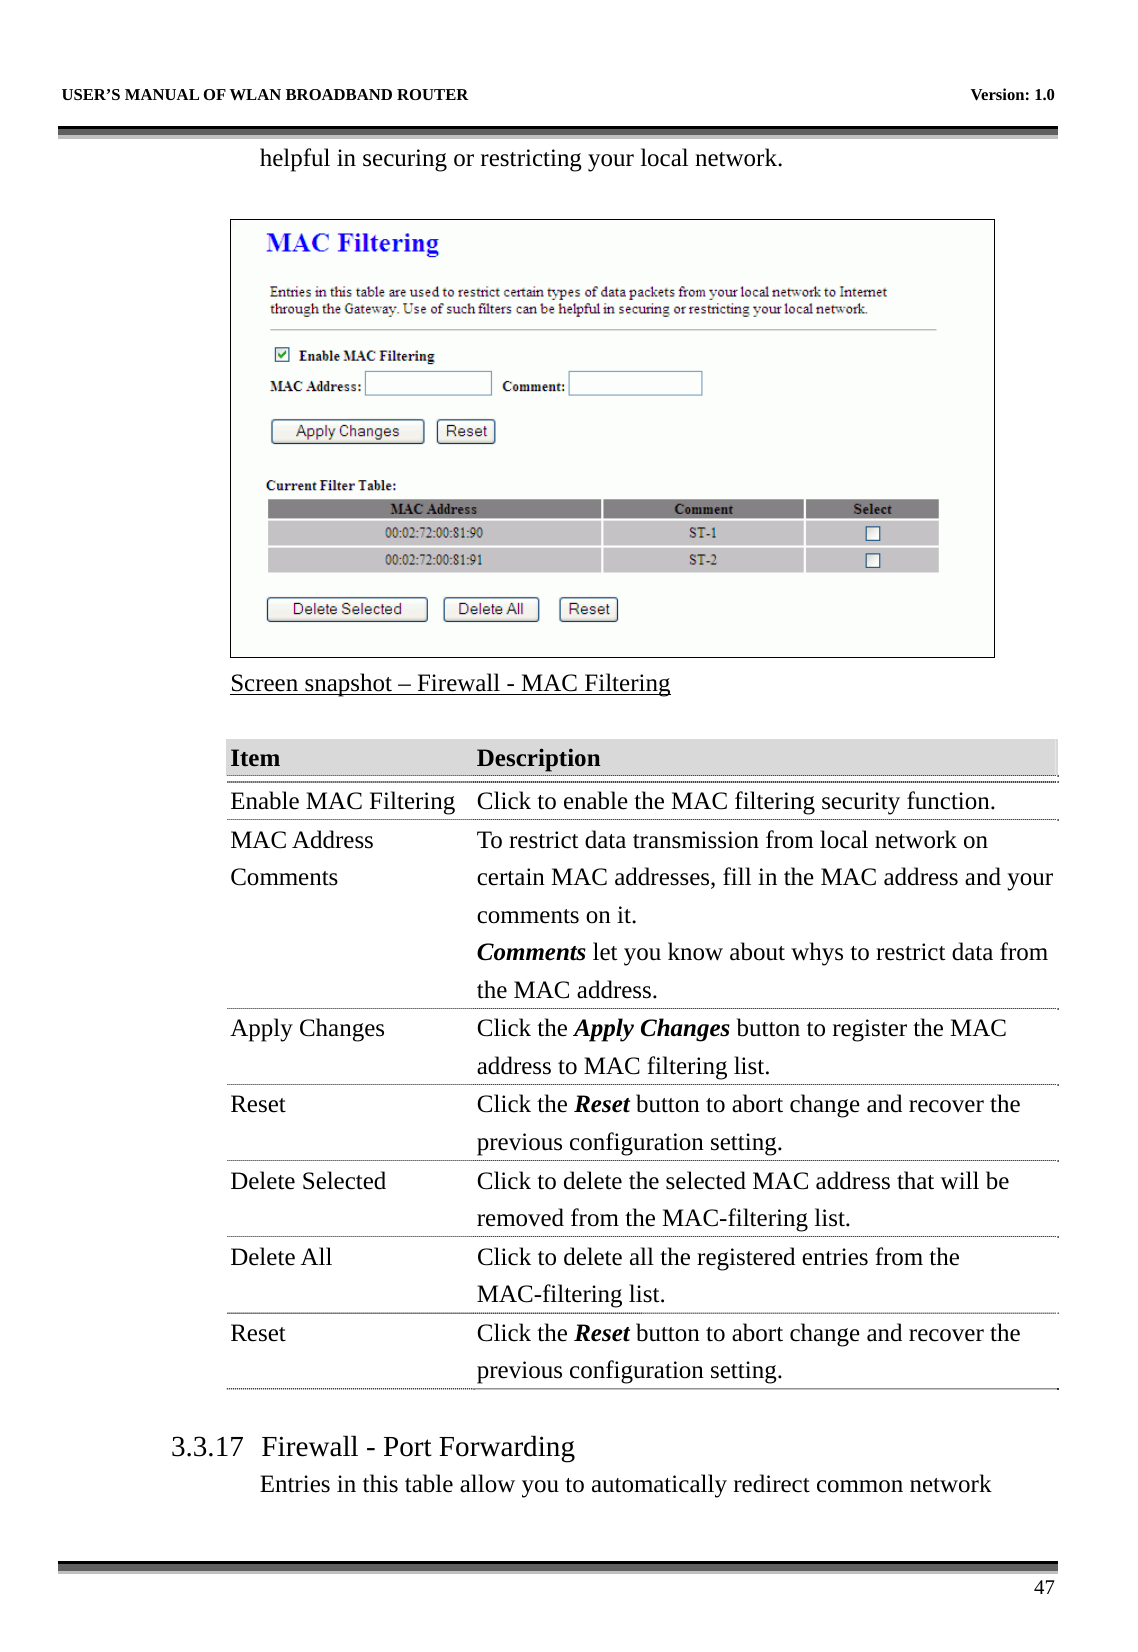   USER’S MANUAL OF WLAN BROADBAND ROUTER    Version: 1.0      47 helpful in securing or restricting your local network.   Screen snapshot – Firewall - MAC Filtering  Item  Description   Enable MAC Filtering  Click to enable the MAC filtering security function. MAC Address Comments To restrict data transmission from local network on certain MAC addresses, fill in the MAC address and your comments on it. Comments let you know about whys to restrict data from the MAC address. Apply Changes  Click the Apply Changes button to register the MAC address to MAC filtering list. Reset Click the Reset button to abort change and recover the previous configuration setting. Delete Selected  Click to delete the selected MAC address that will be removed from the MAC-filtering list. Delete All  Click to delete all the registered entries from the MAC-filtering list.   Reset Click the Reset button to abort change and recover the previous configuration setting.  3.3.17 Firewall - Port Forwarding Entries in this table allow you to automatically redirect common network 